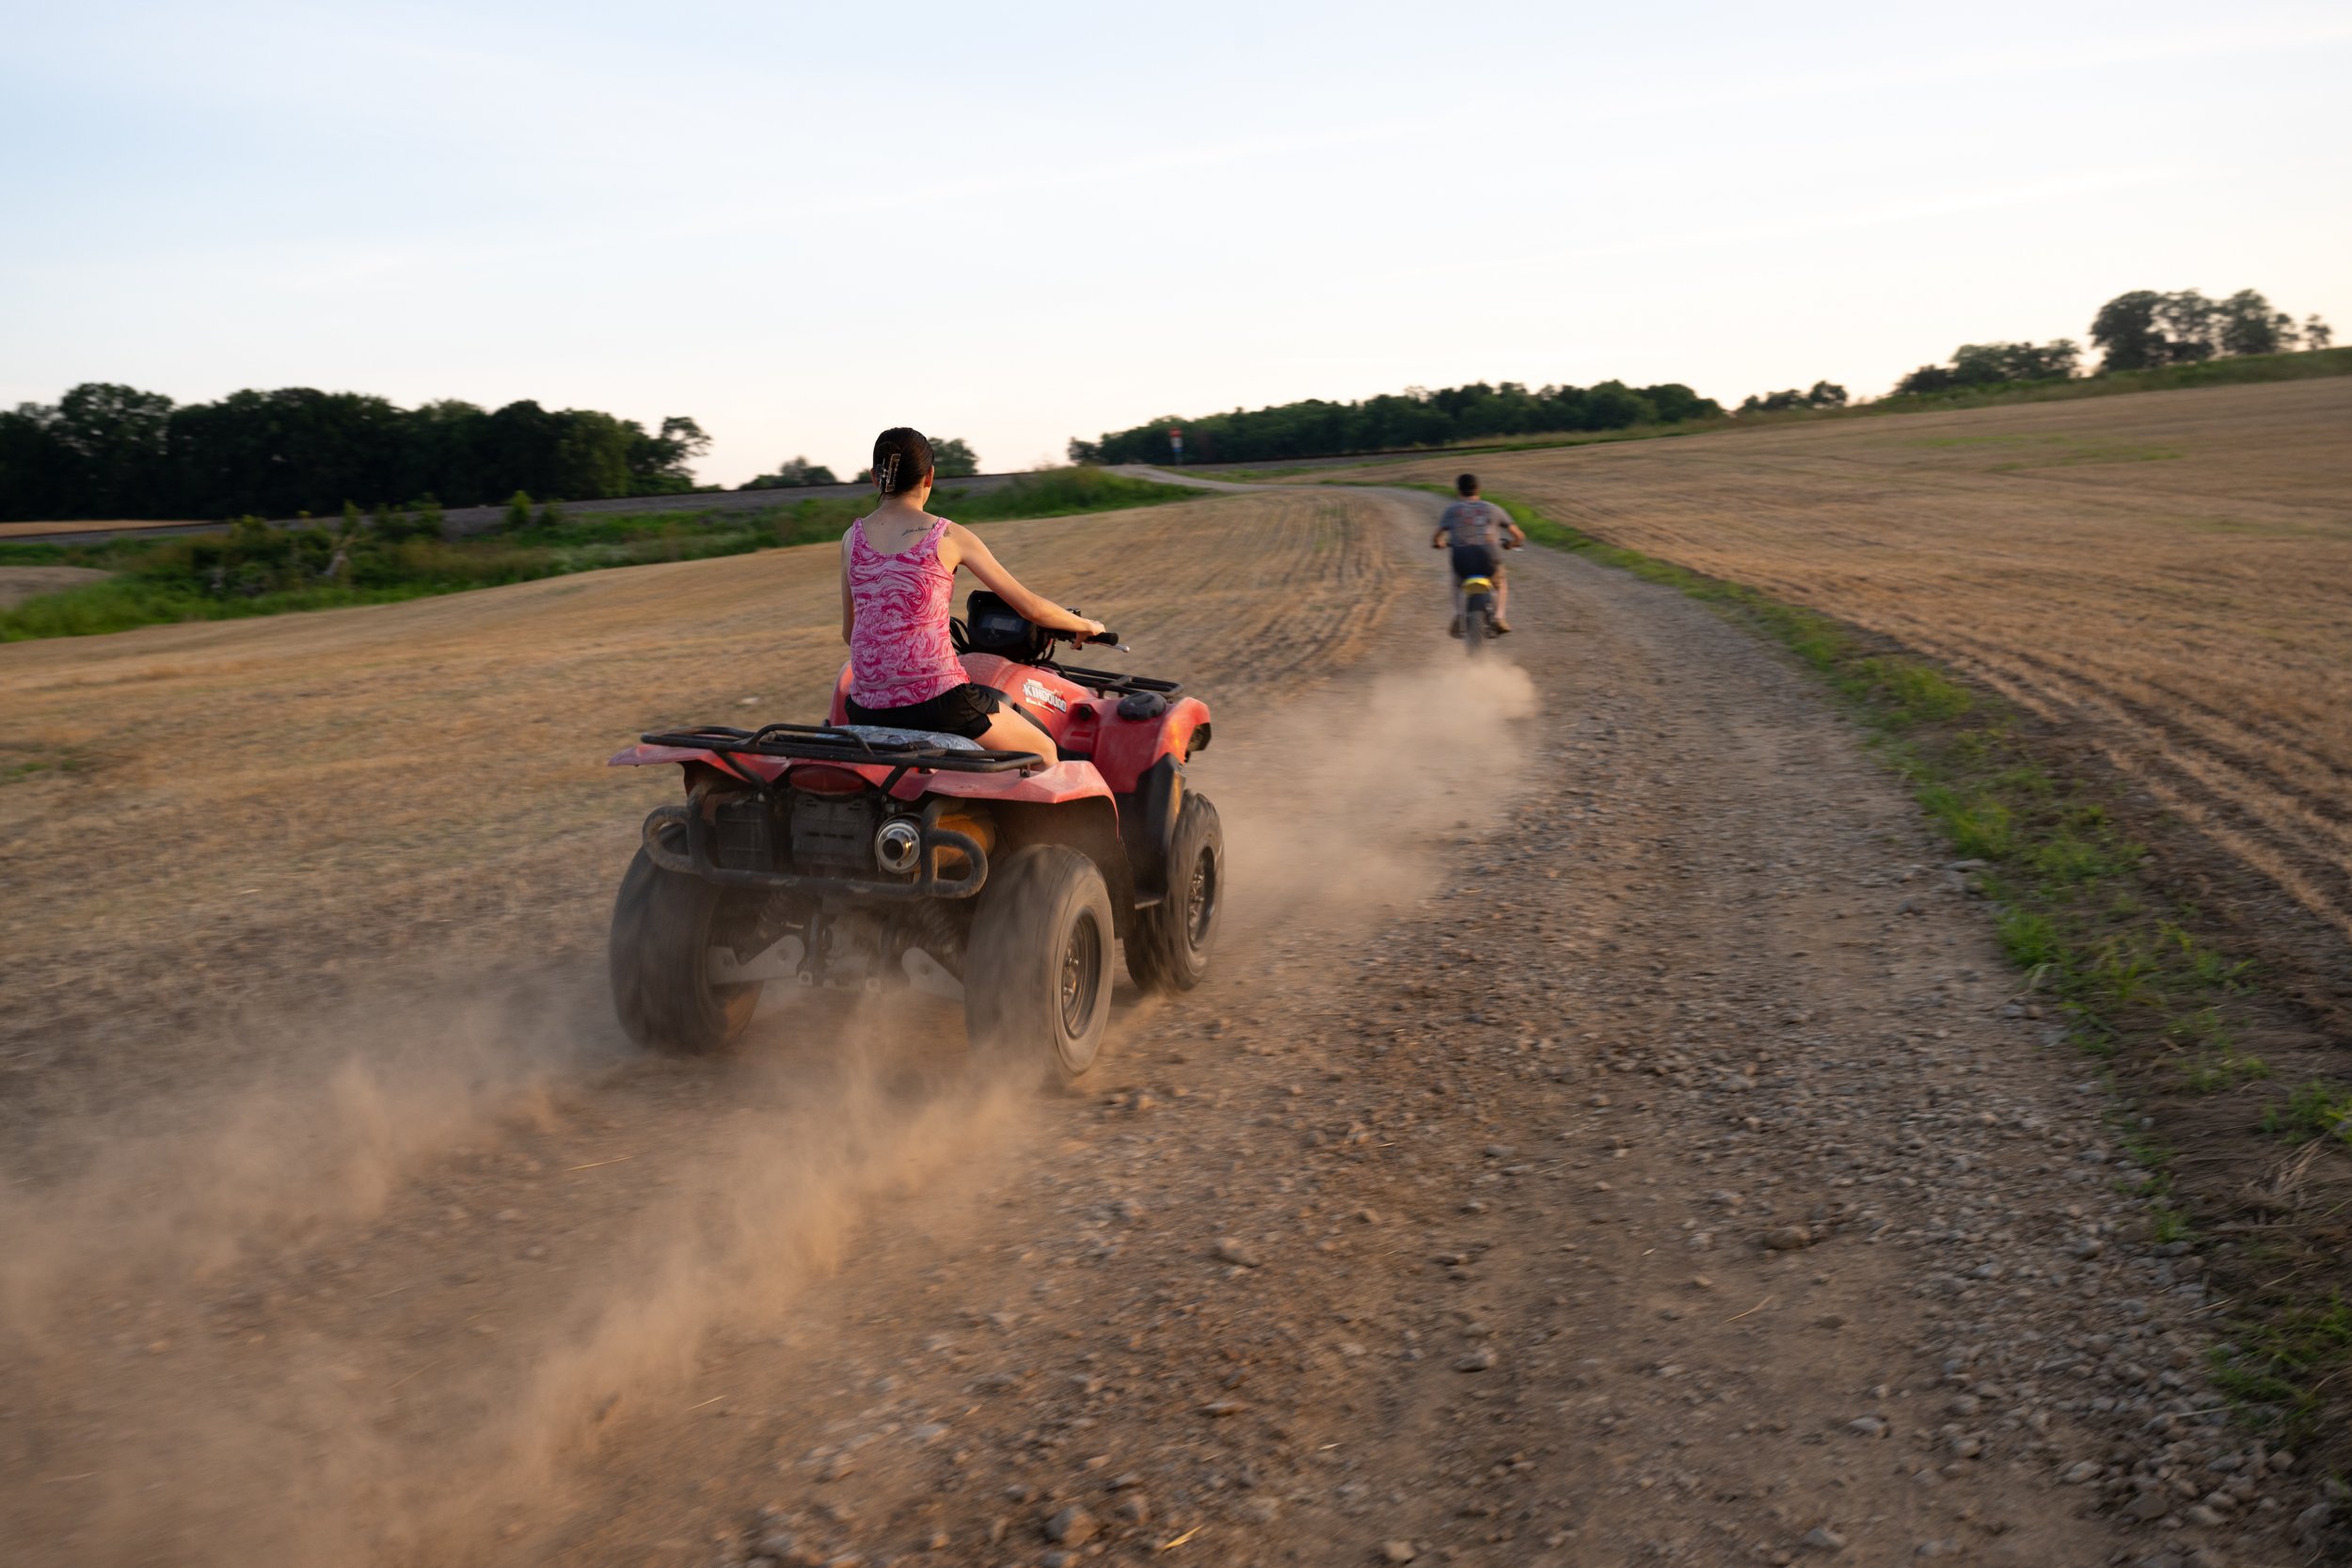  7/7/23 -- Cynthiana, Kentucky —  Ashlynn McNees, 18, rides a four wheeler on her family's land with her boyfriend, Chase Edwards, in Cynthiana, KY on July 7, 2023. 